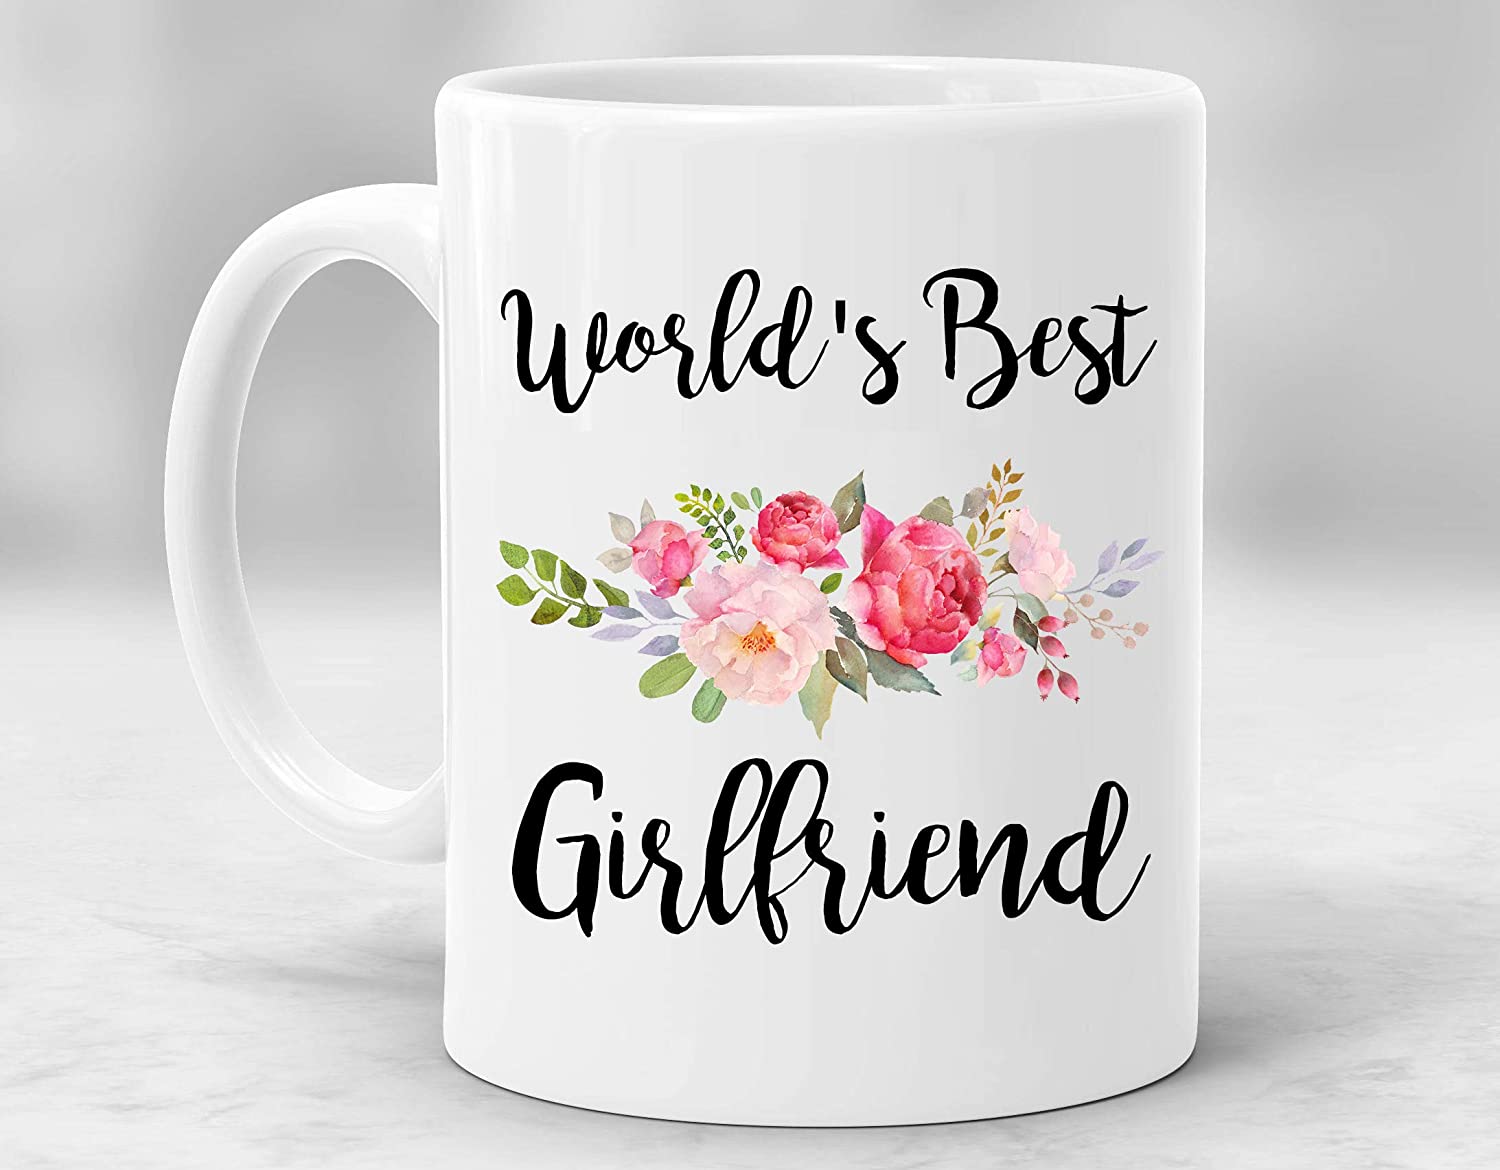 Top Gifts That Girls Would Love